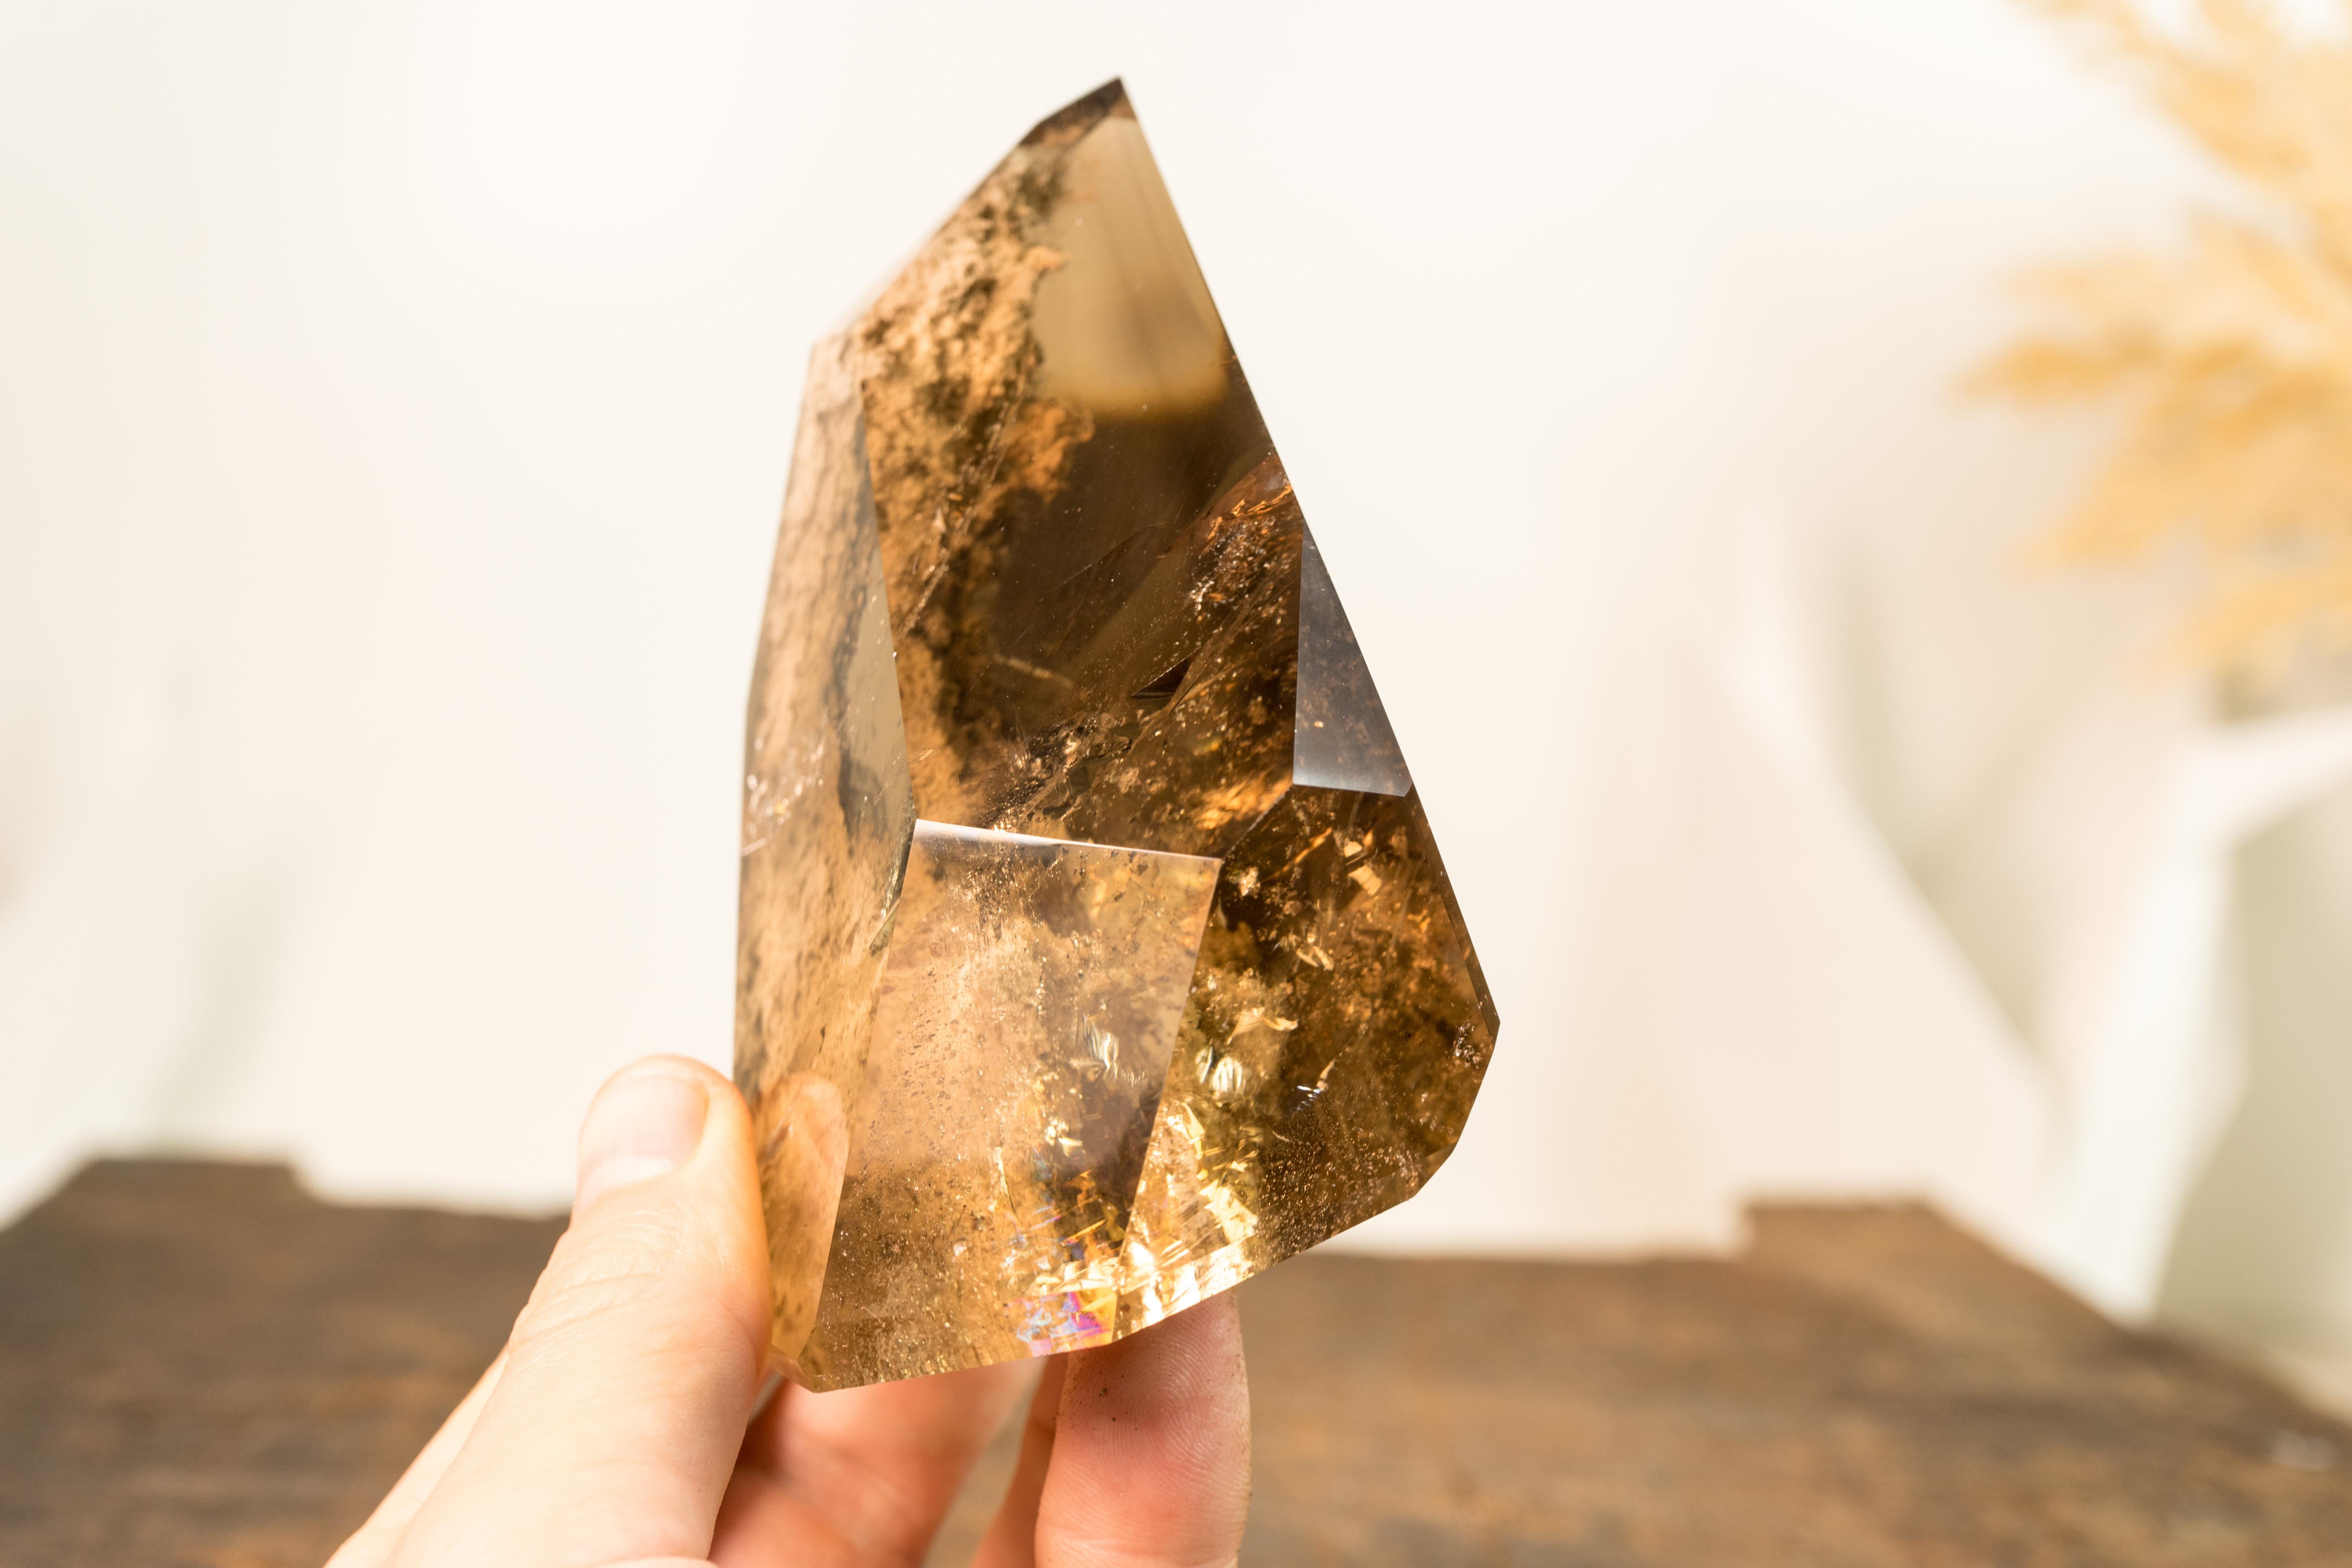 A natural artwork that began forming millions of years ago, this Smoky Citrine Quartz offers a window to the past, encapsulating a landscape within a crystal. This Smoky Citrine Crystal makes a valuable addition to your crystal collection or a